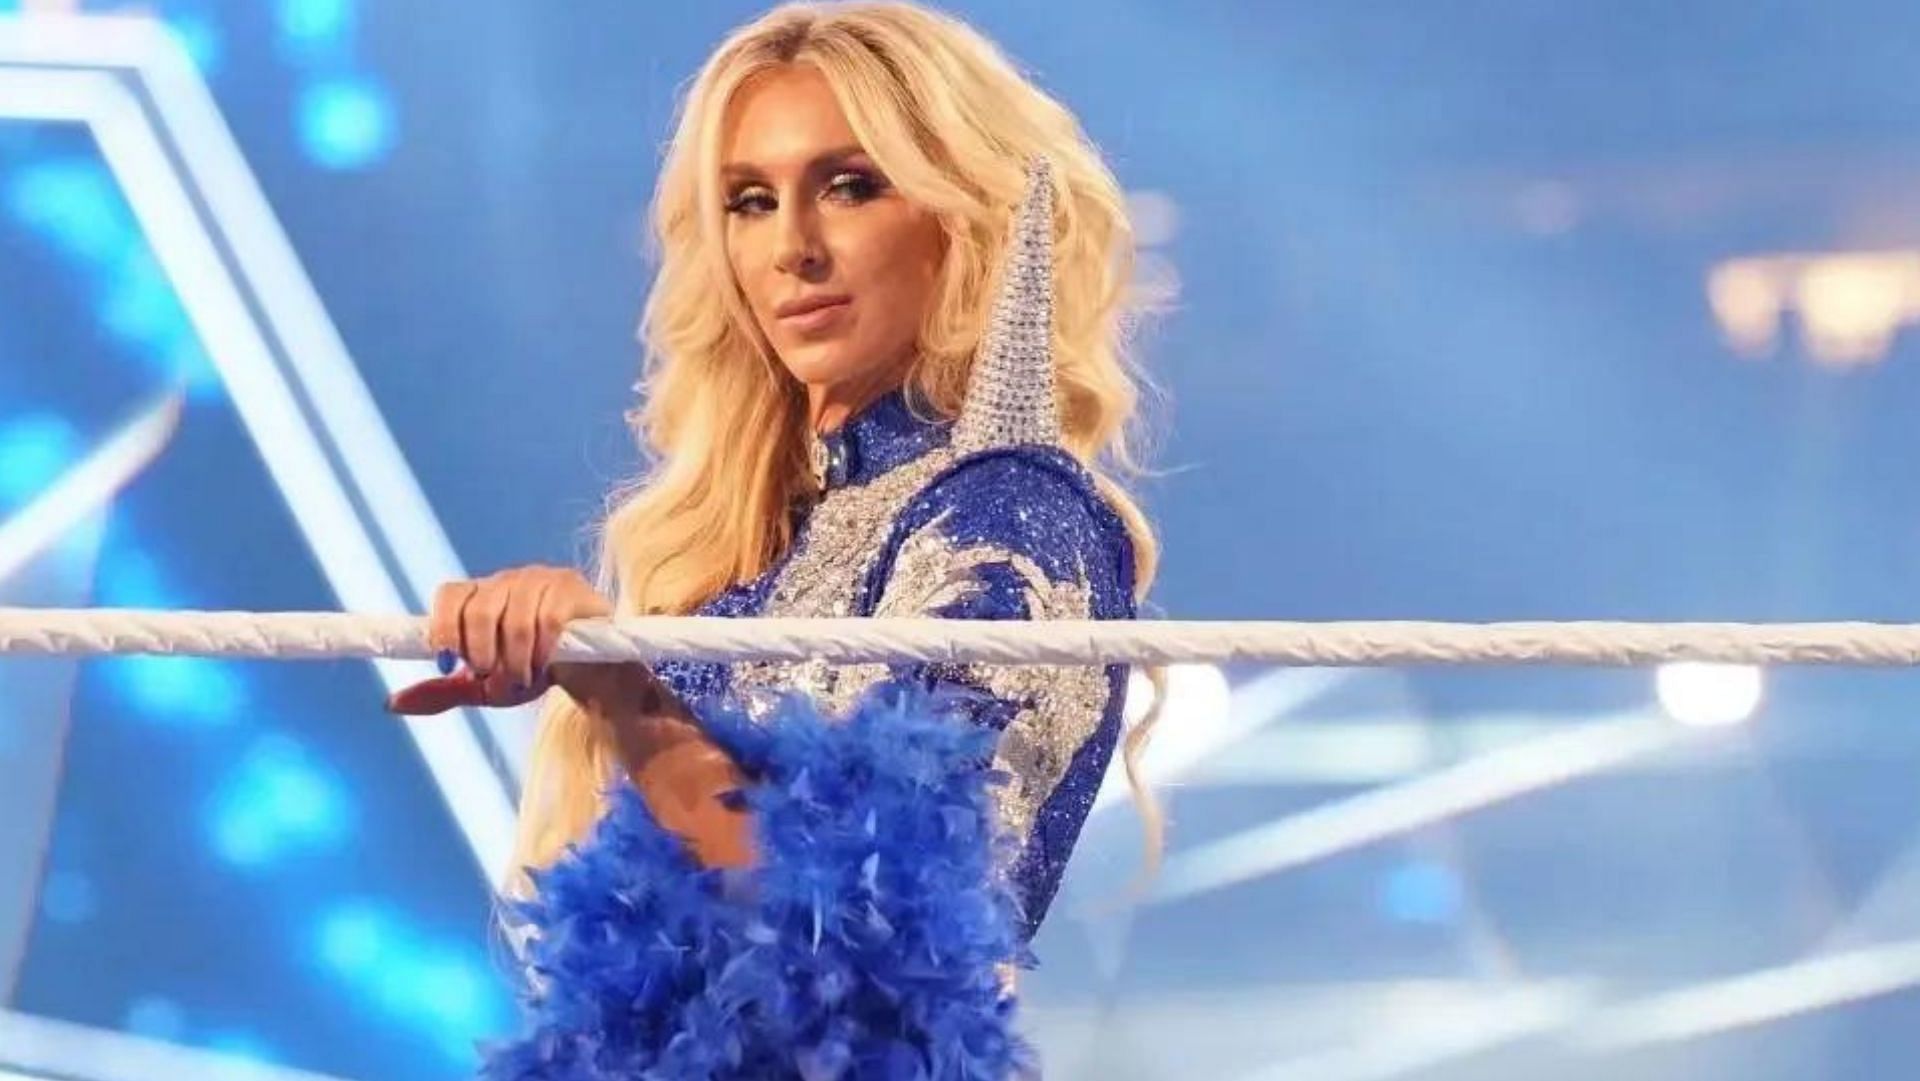 Charlotte Flair is a multi-time WWE champion.